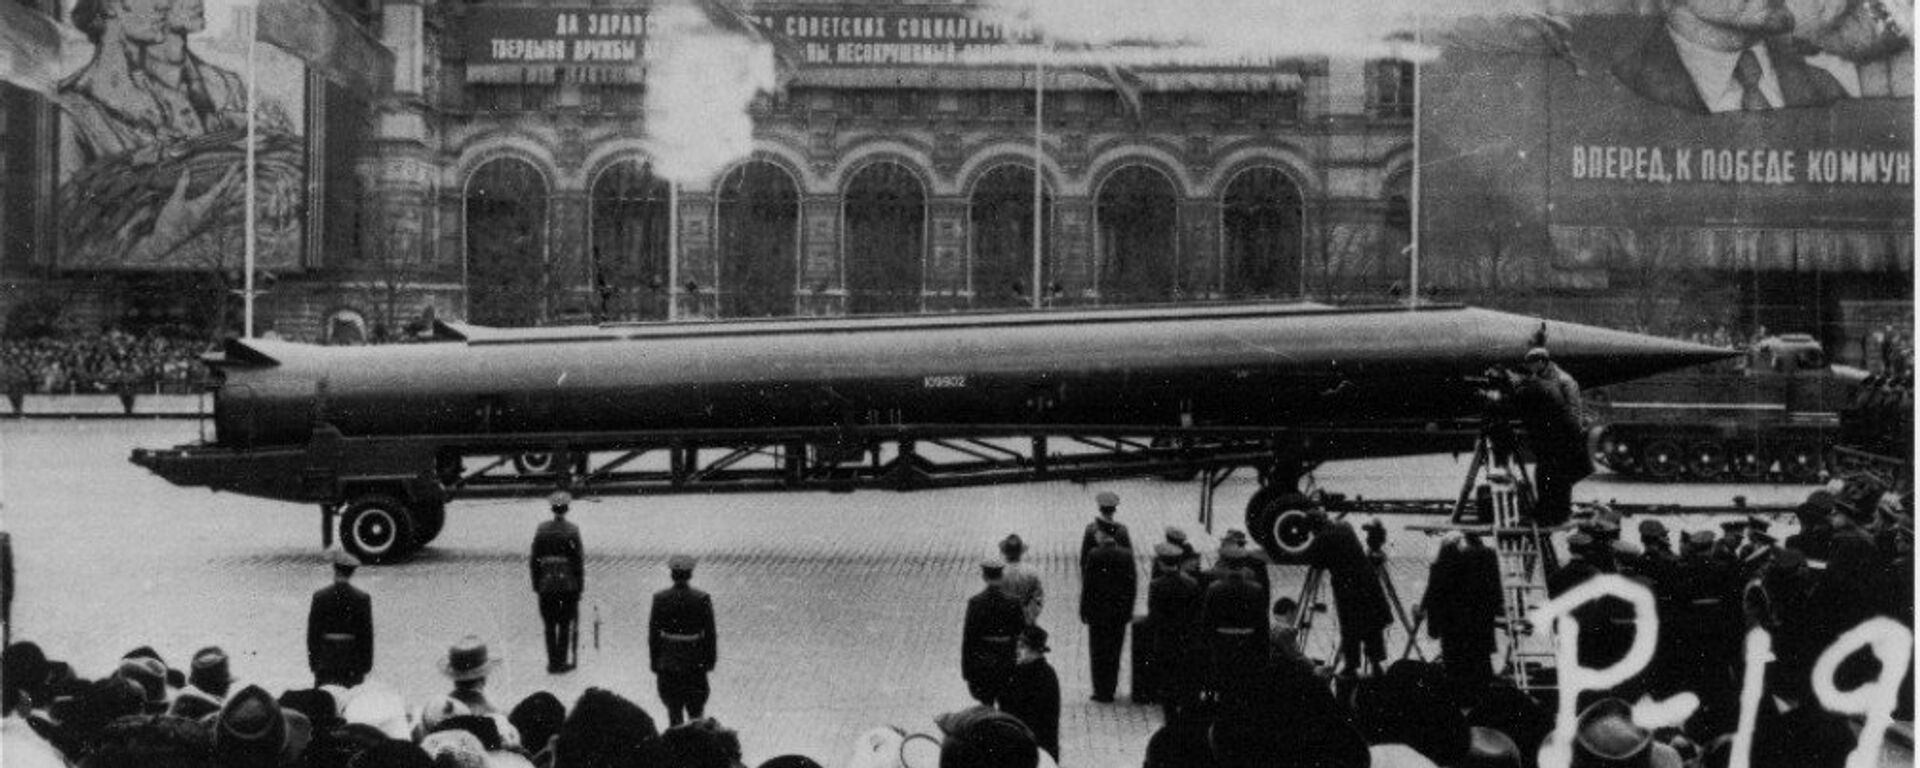 CIA reference photograph of Soviet medium-range ballistic missile (SS-4 in U.S. documents, R-12 in Soviet documents) in Red Square, Moscow. The weapon was deployed to Cuba in October 1962, sparking the Cuban Missile Crisis. - Sputnik International, 1920, 28.10.2022